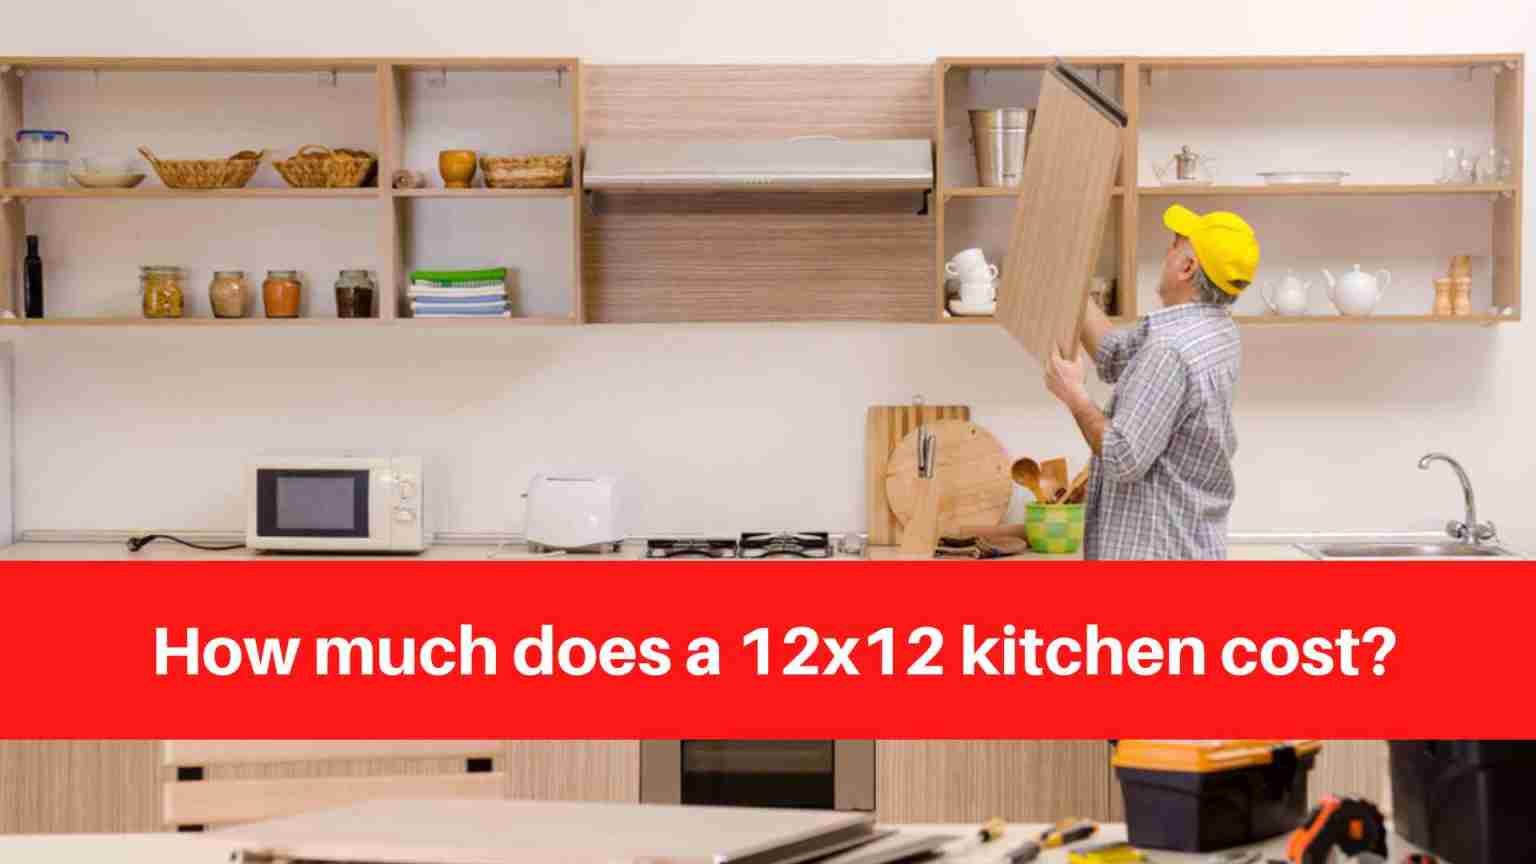 How much does a 12x12 kitchen cost